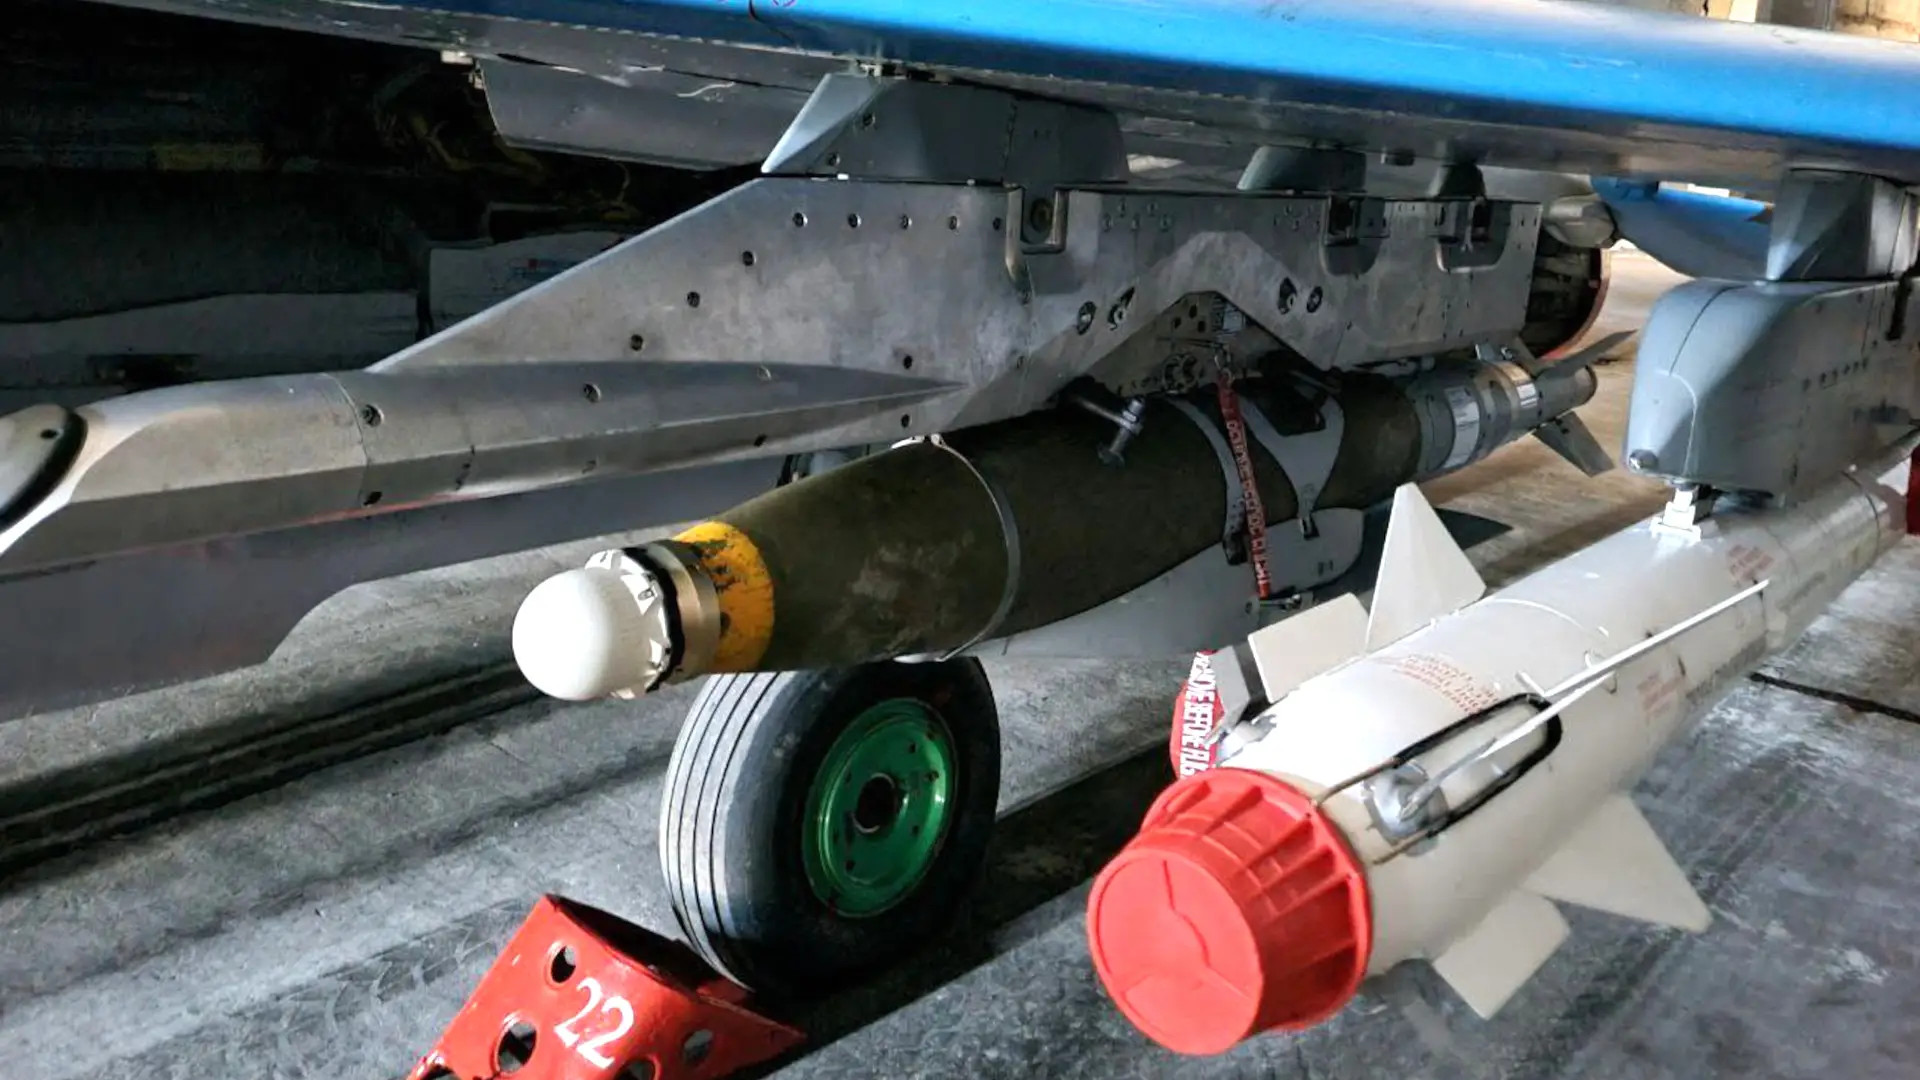 A JDAM-ER under the wing of a Ukrainian MiG-29 offering a good look at the specialized pylon used to employ these weapons from those aircraft, as well as Su-27s. <em>via X</em>